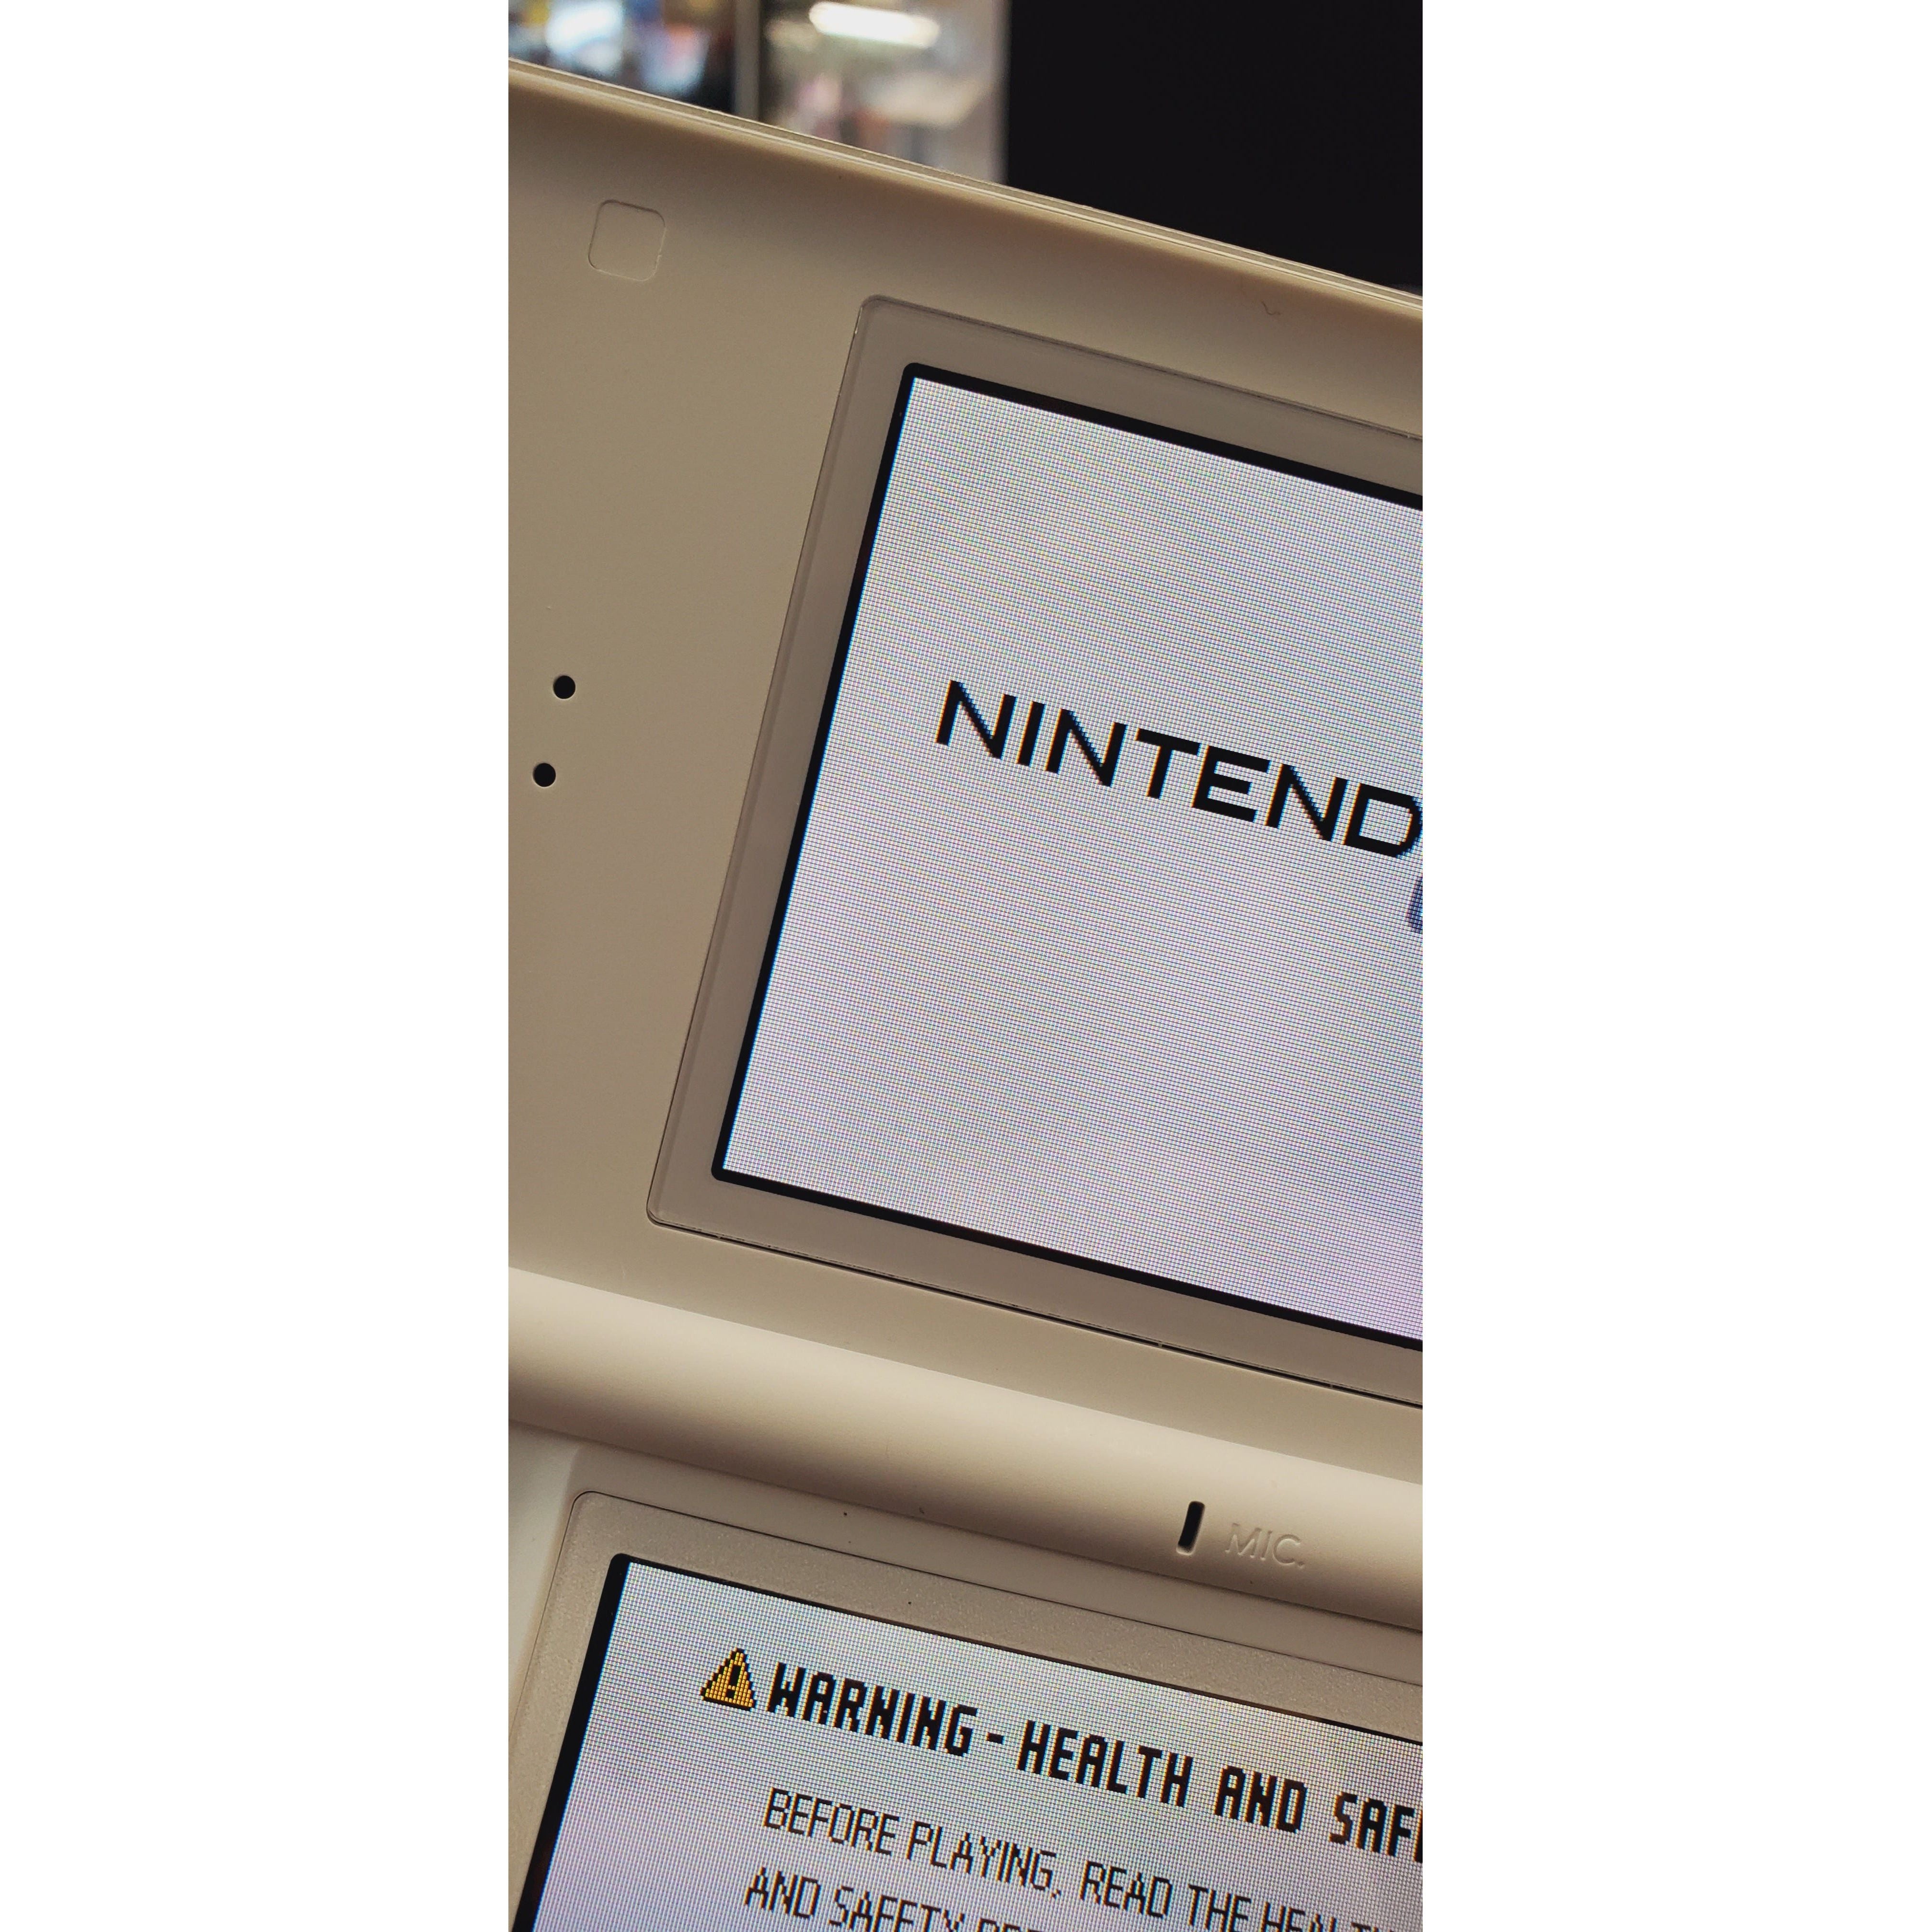 DS Lite System (White / Reduced)